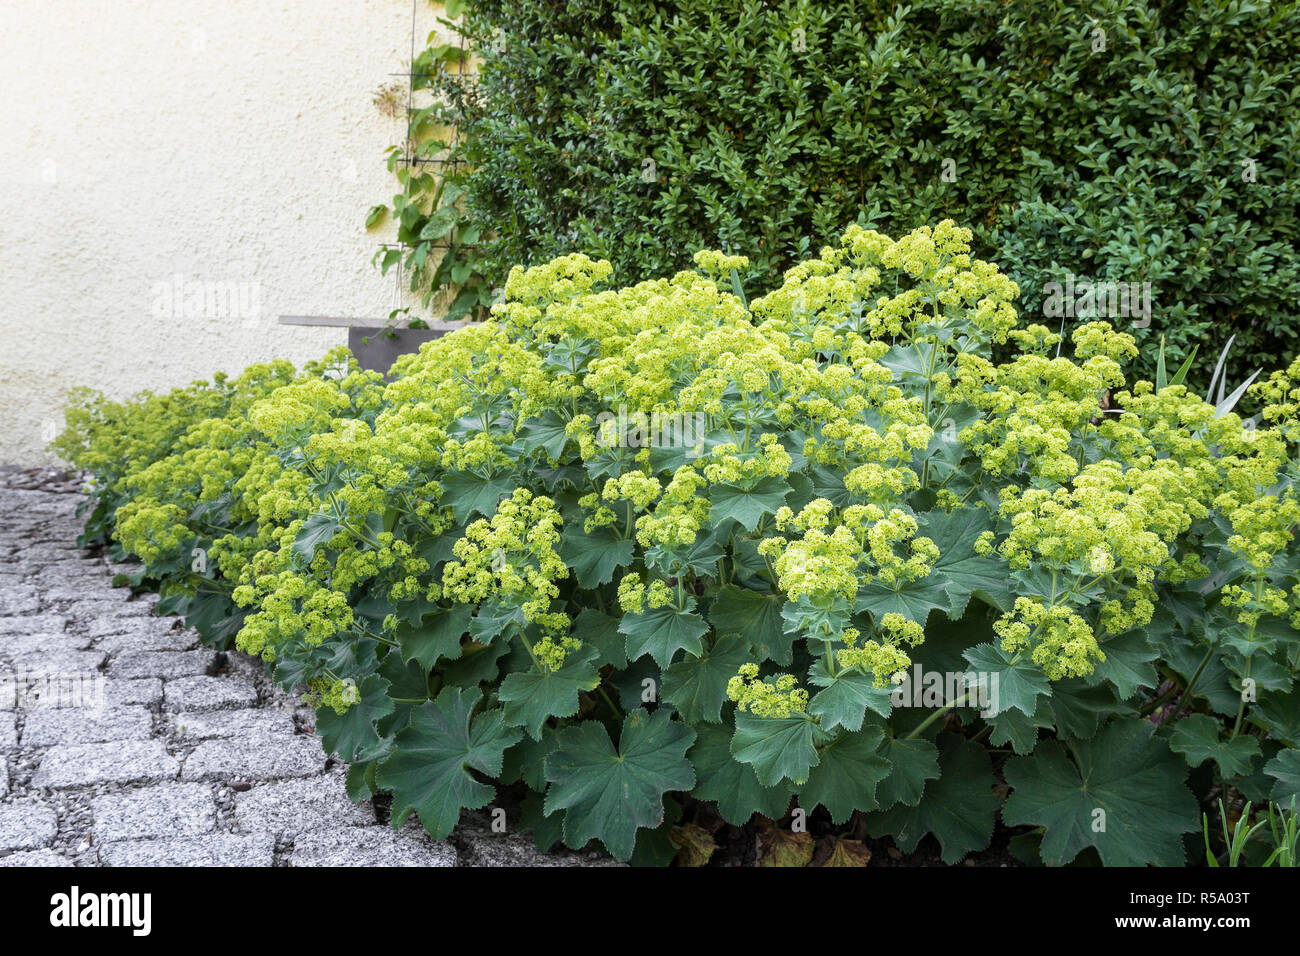 blooming lady's mantle (alchemilla),close-up Stock Photo